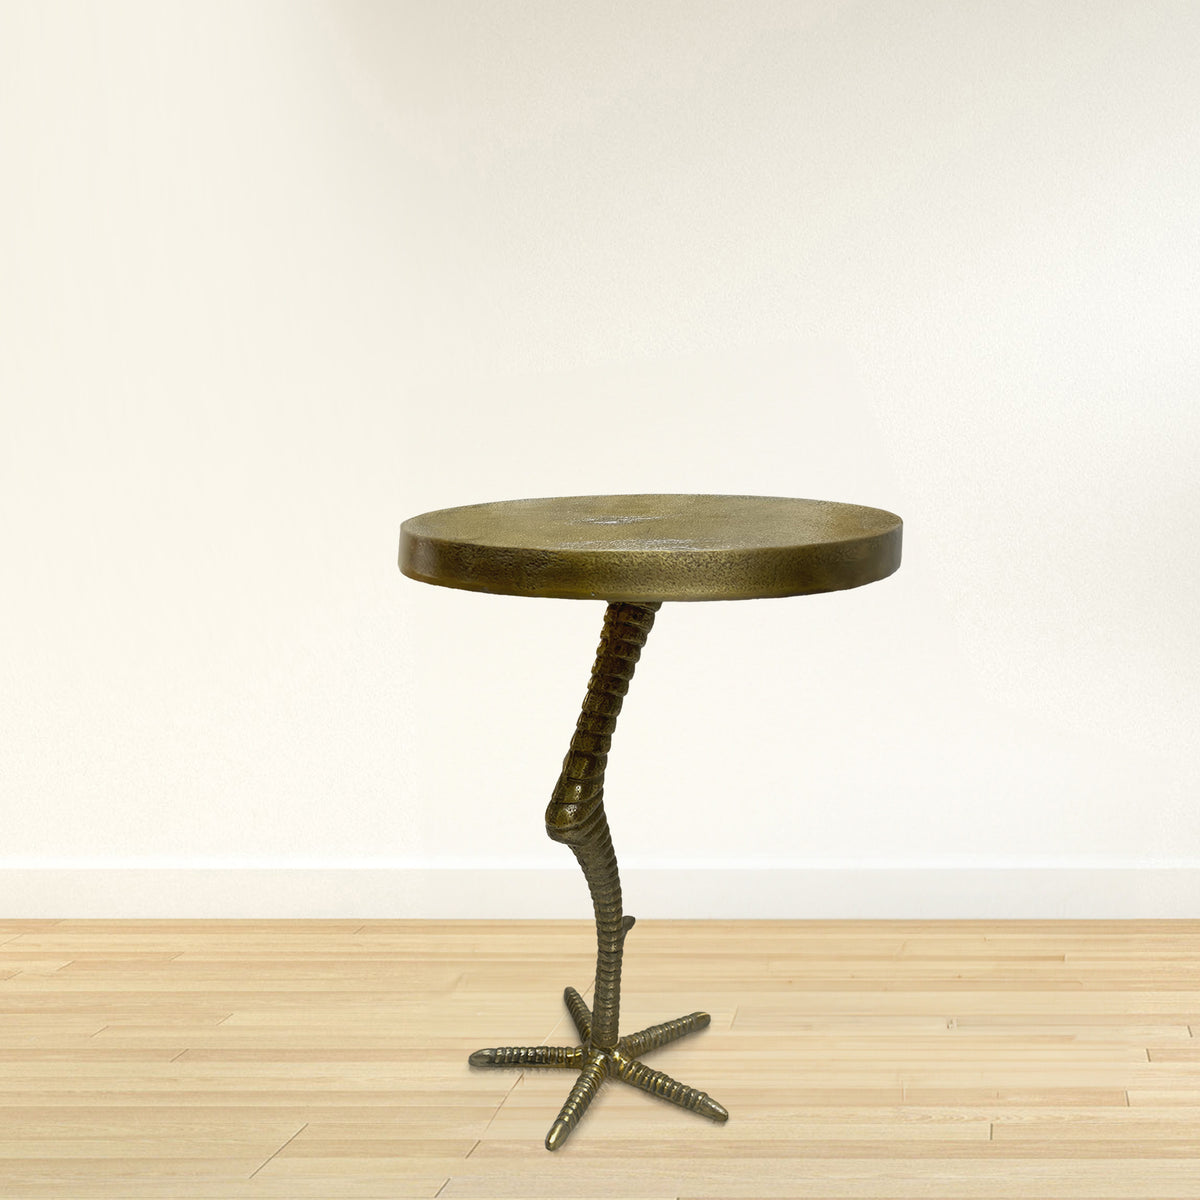 19 Inch Side End Table, Antique Brass Aluminum Cast, Round Top with Handcrafted Textured Bird Leg Stem - UPT-295603